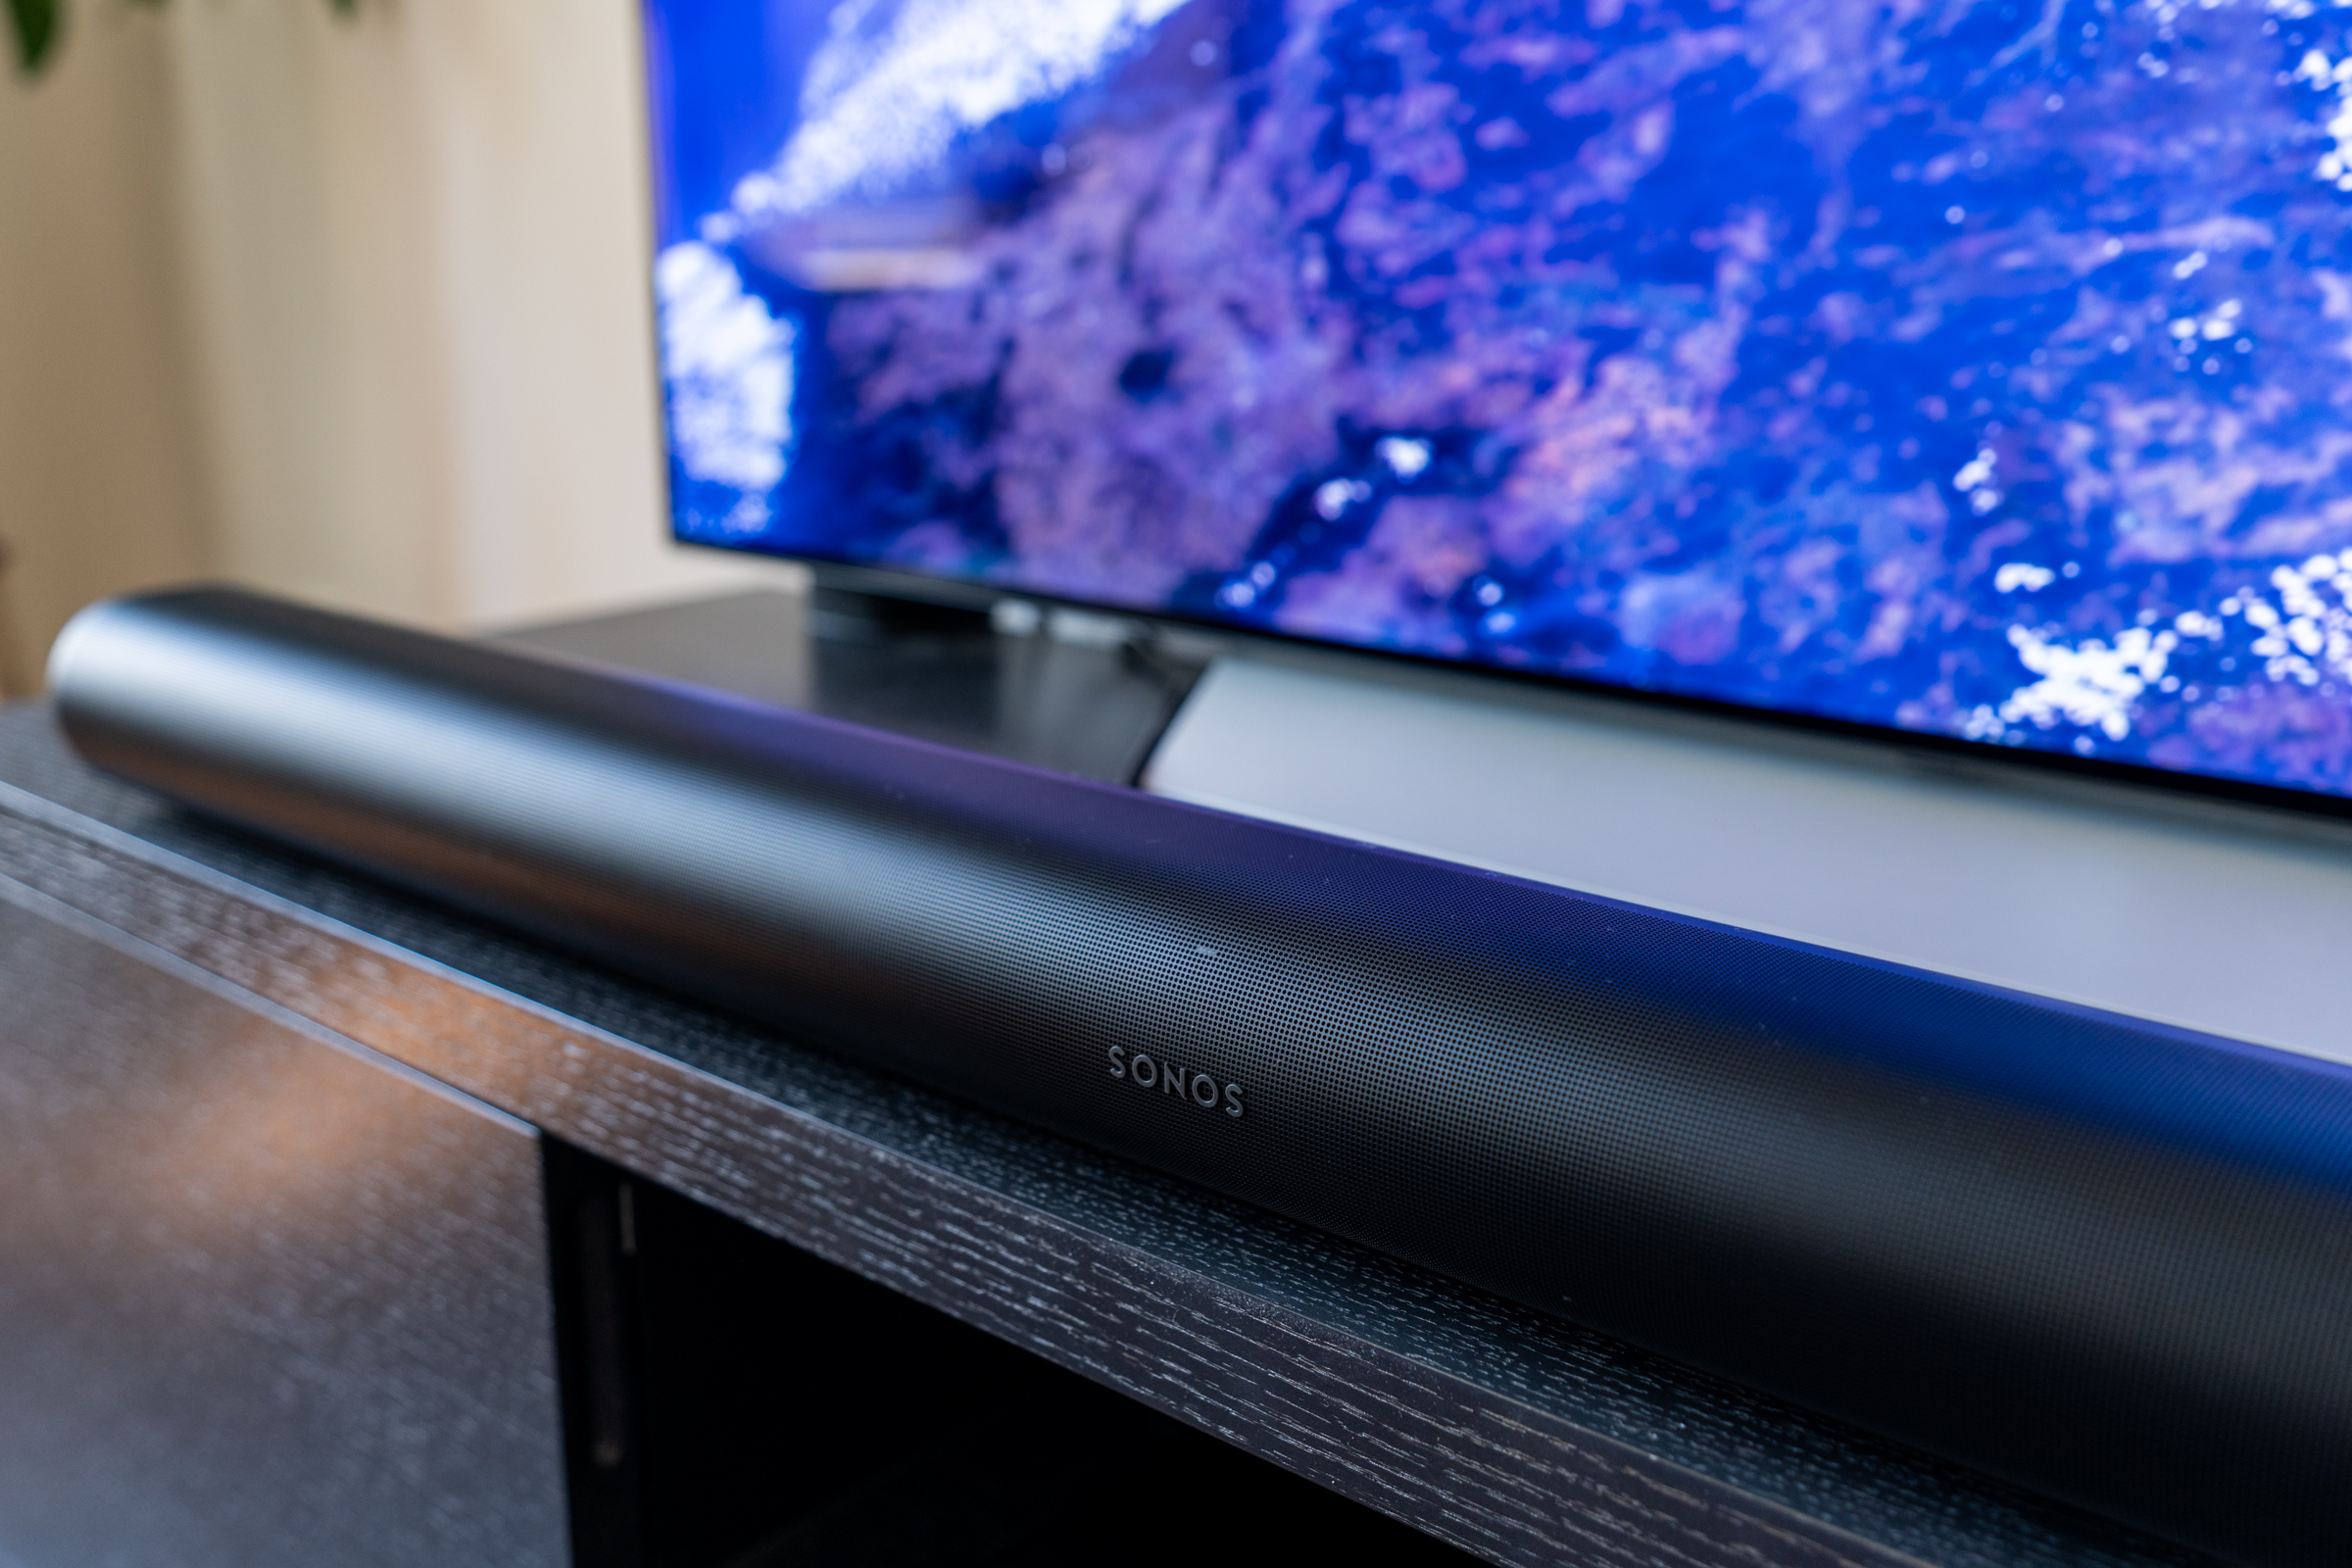 Sonos hook up to tv